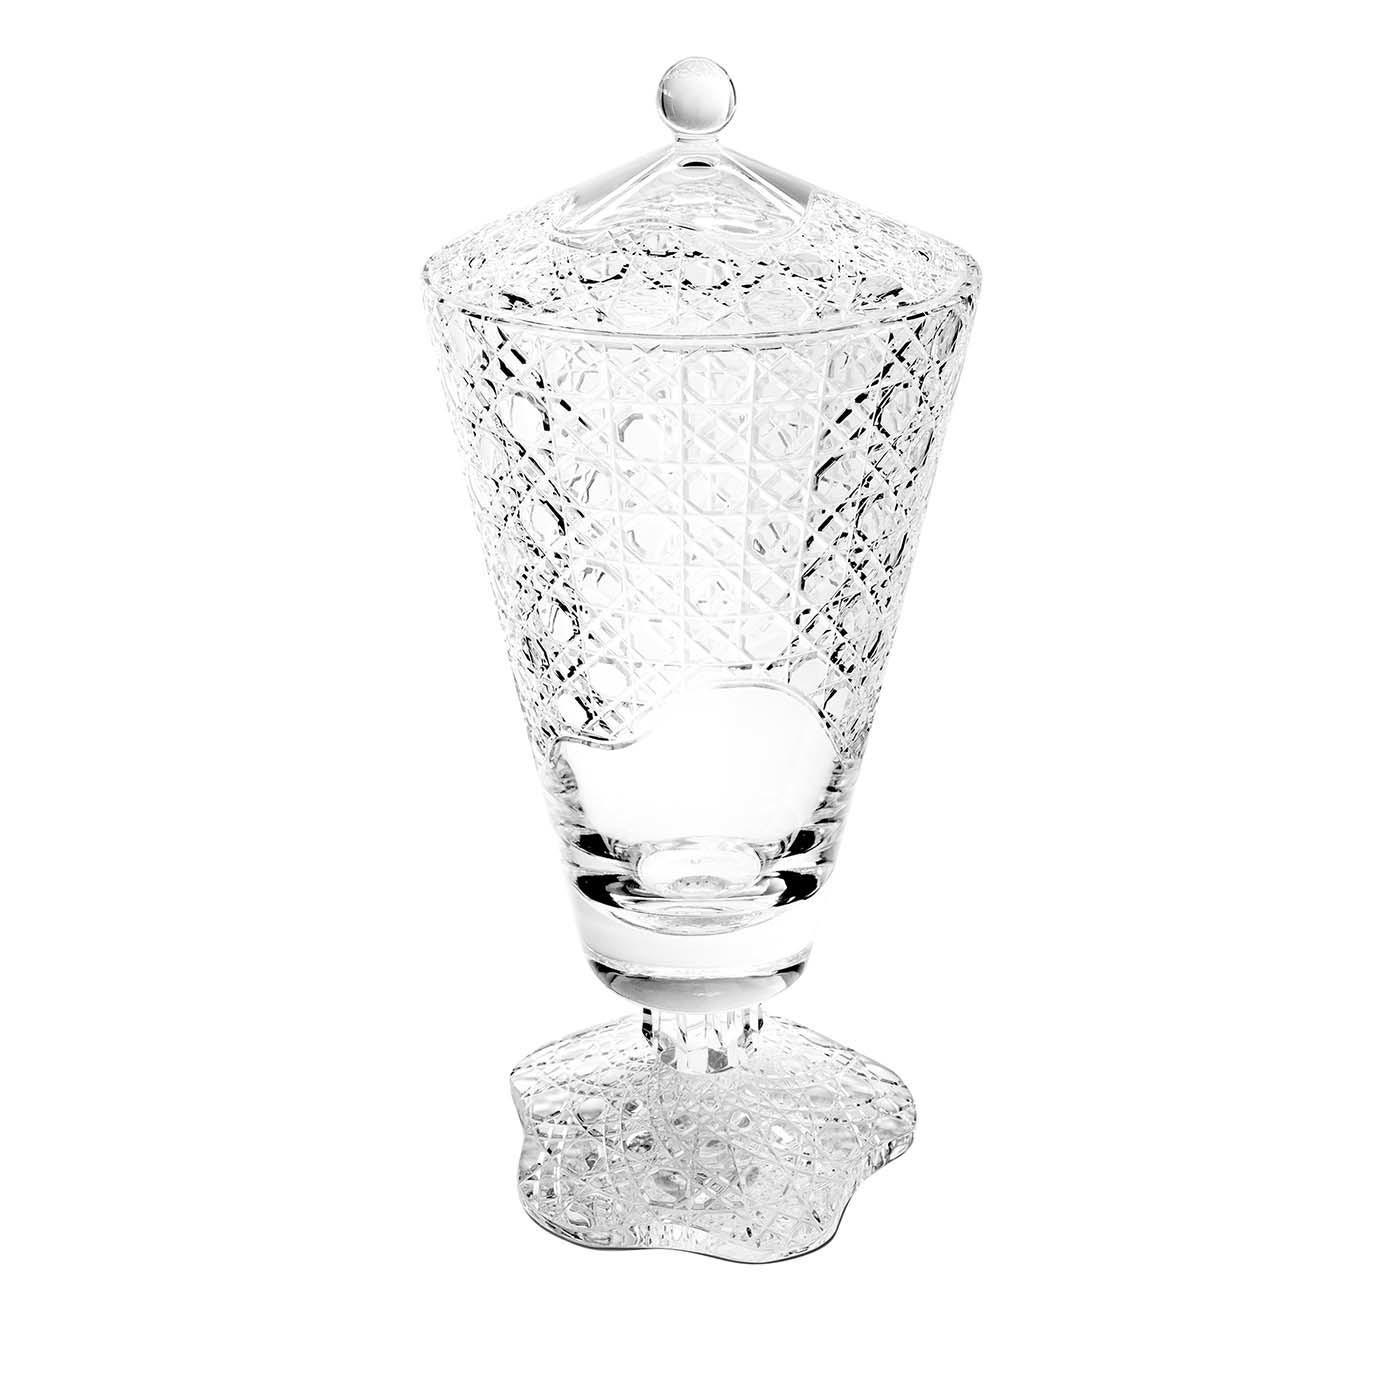 This stunning vase with lid is part of the MetÃ Morphosis collection. Crafted of transparent glass, this piece can be used as an elegant container in a kitchen, living room, or dining room, while also imbuing any home with the sophisticated allure